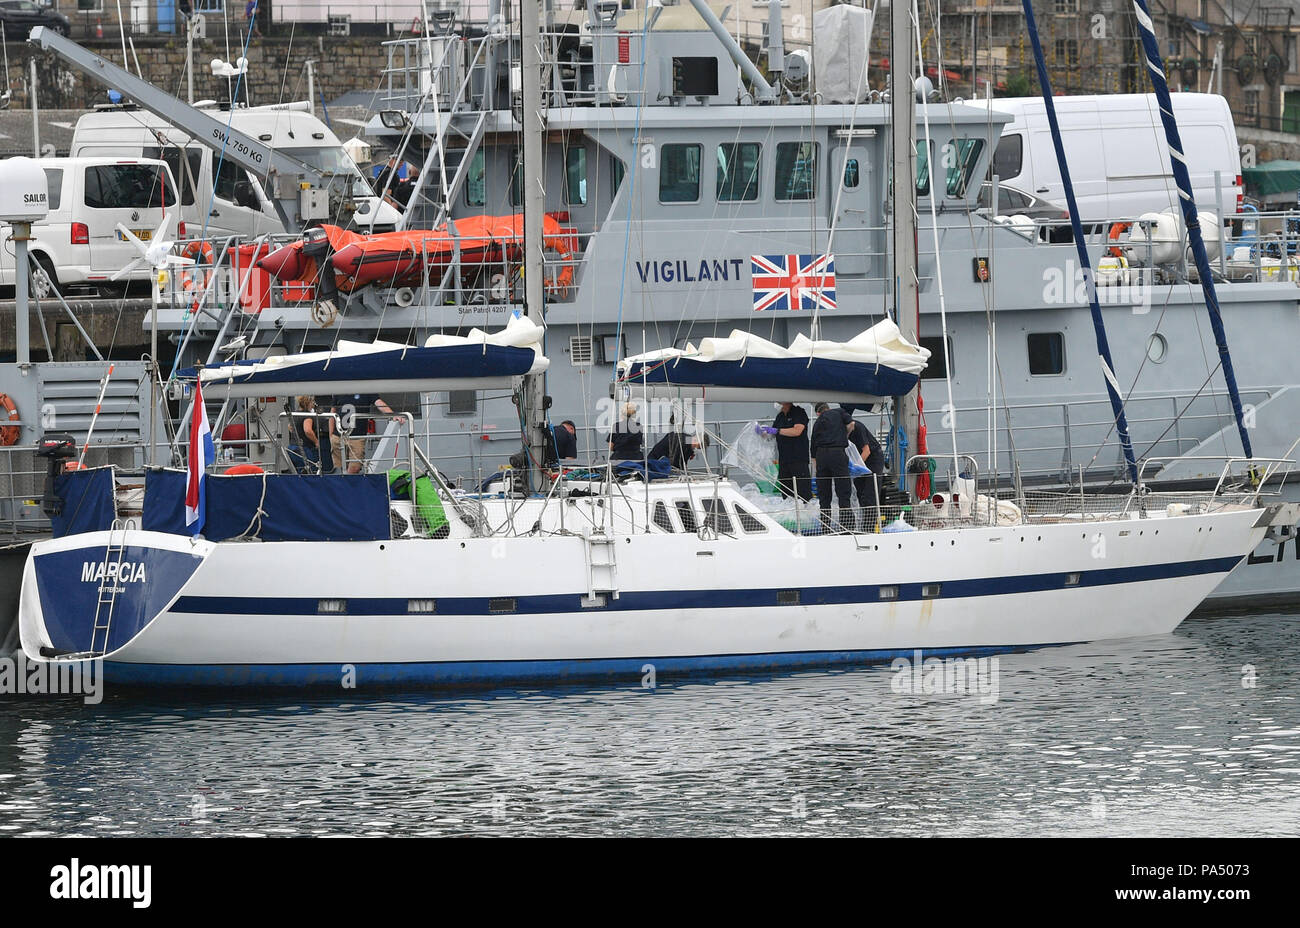 Drugs are unloaded from a boat by officers at Newlyn harbour, with the Border Force cutter HMC Vigilant behind, after the National Crime Agency seized a sailing yacht in the English Channel and bought it back to the harbour and arrested two men on suspicion of drug trafficking. Stock Photo